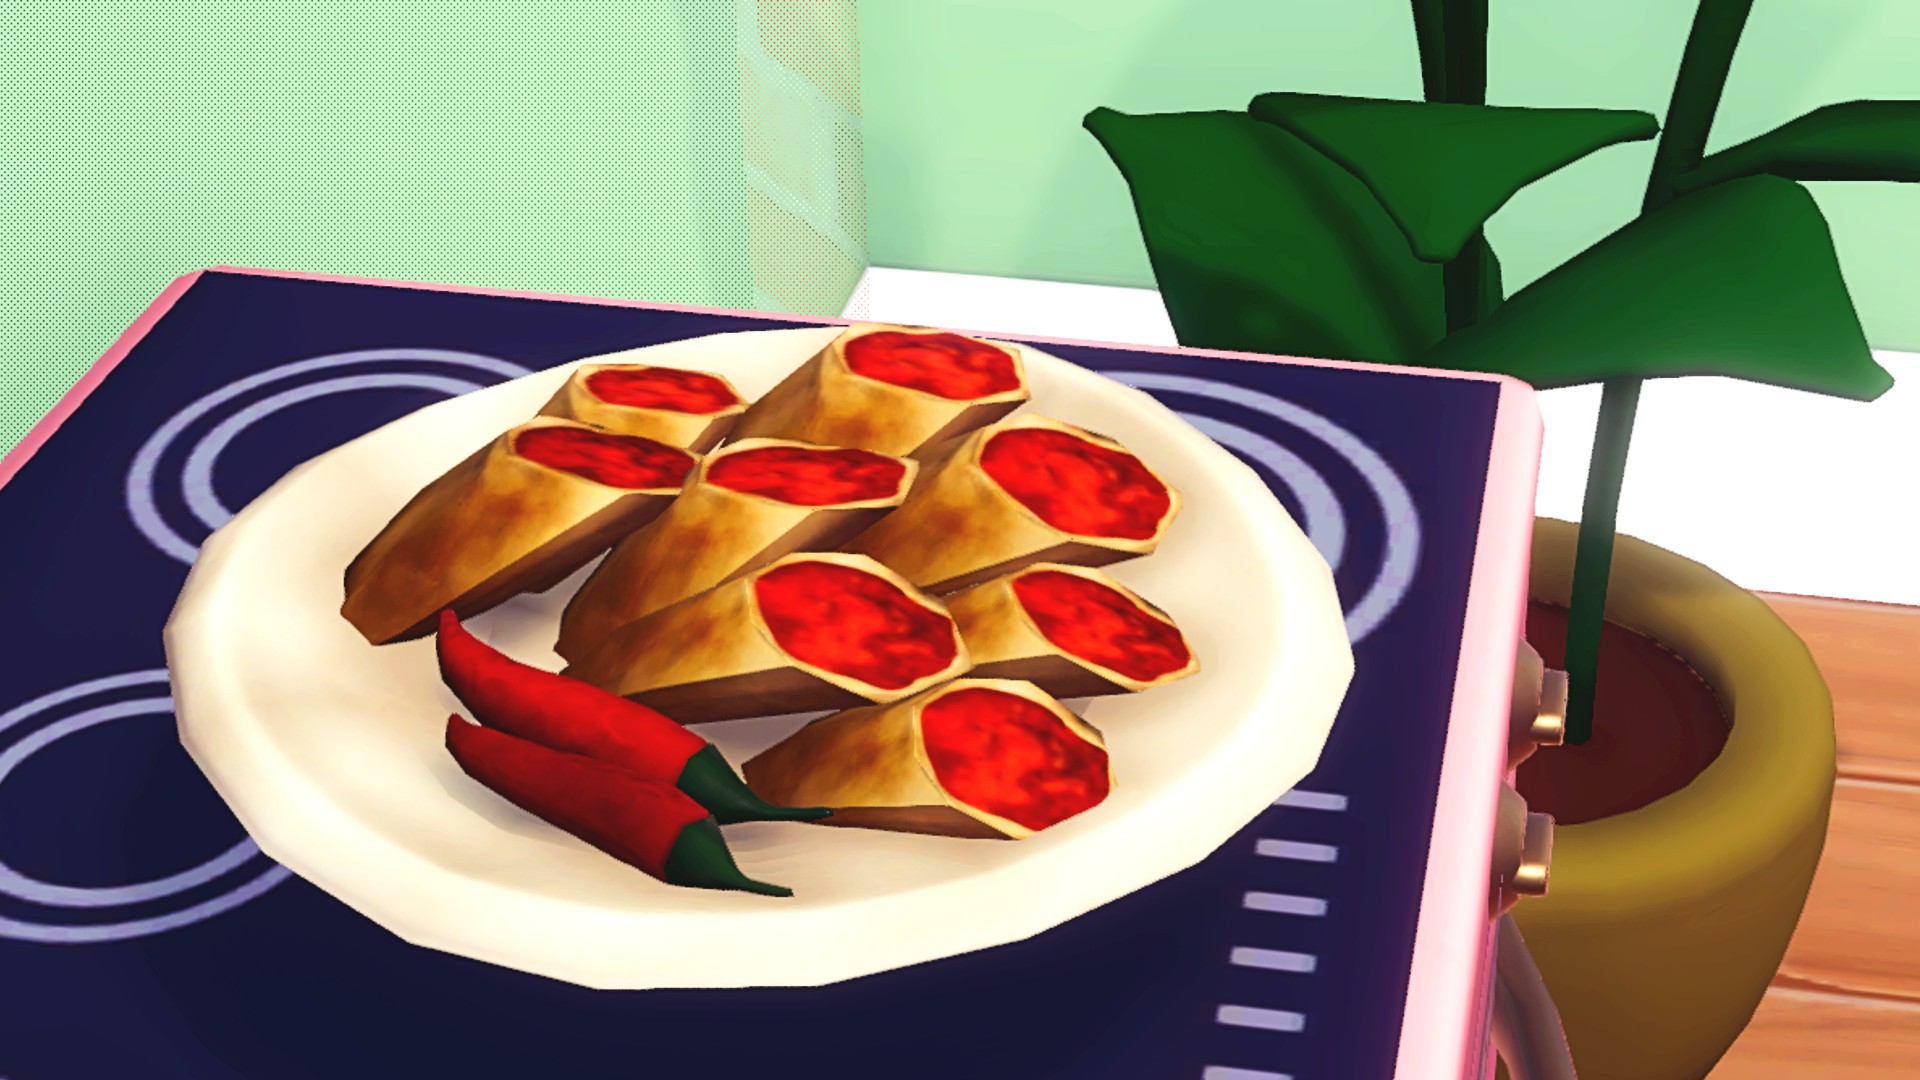 Disney Dreamlight Valley three star recipes: Two red chillis sit beside a plate of Chili Pepper Puffs.